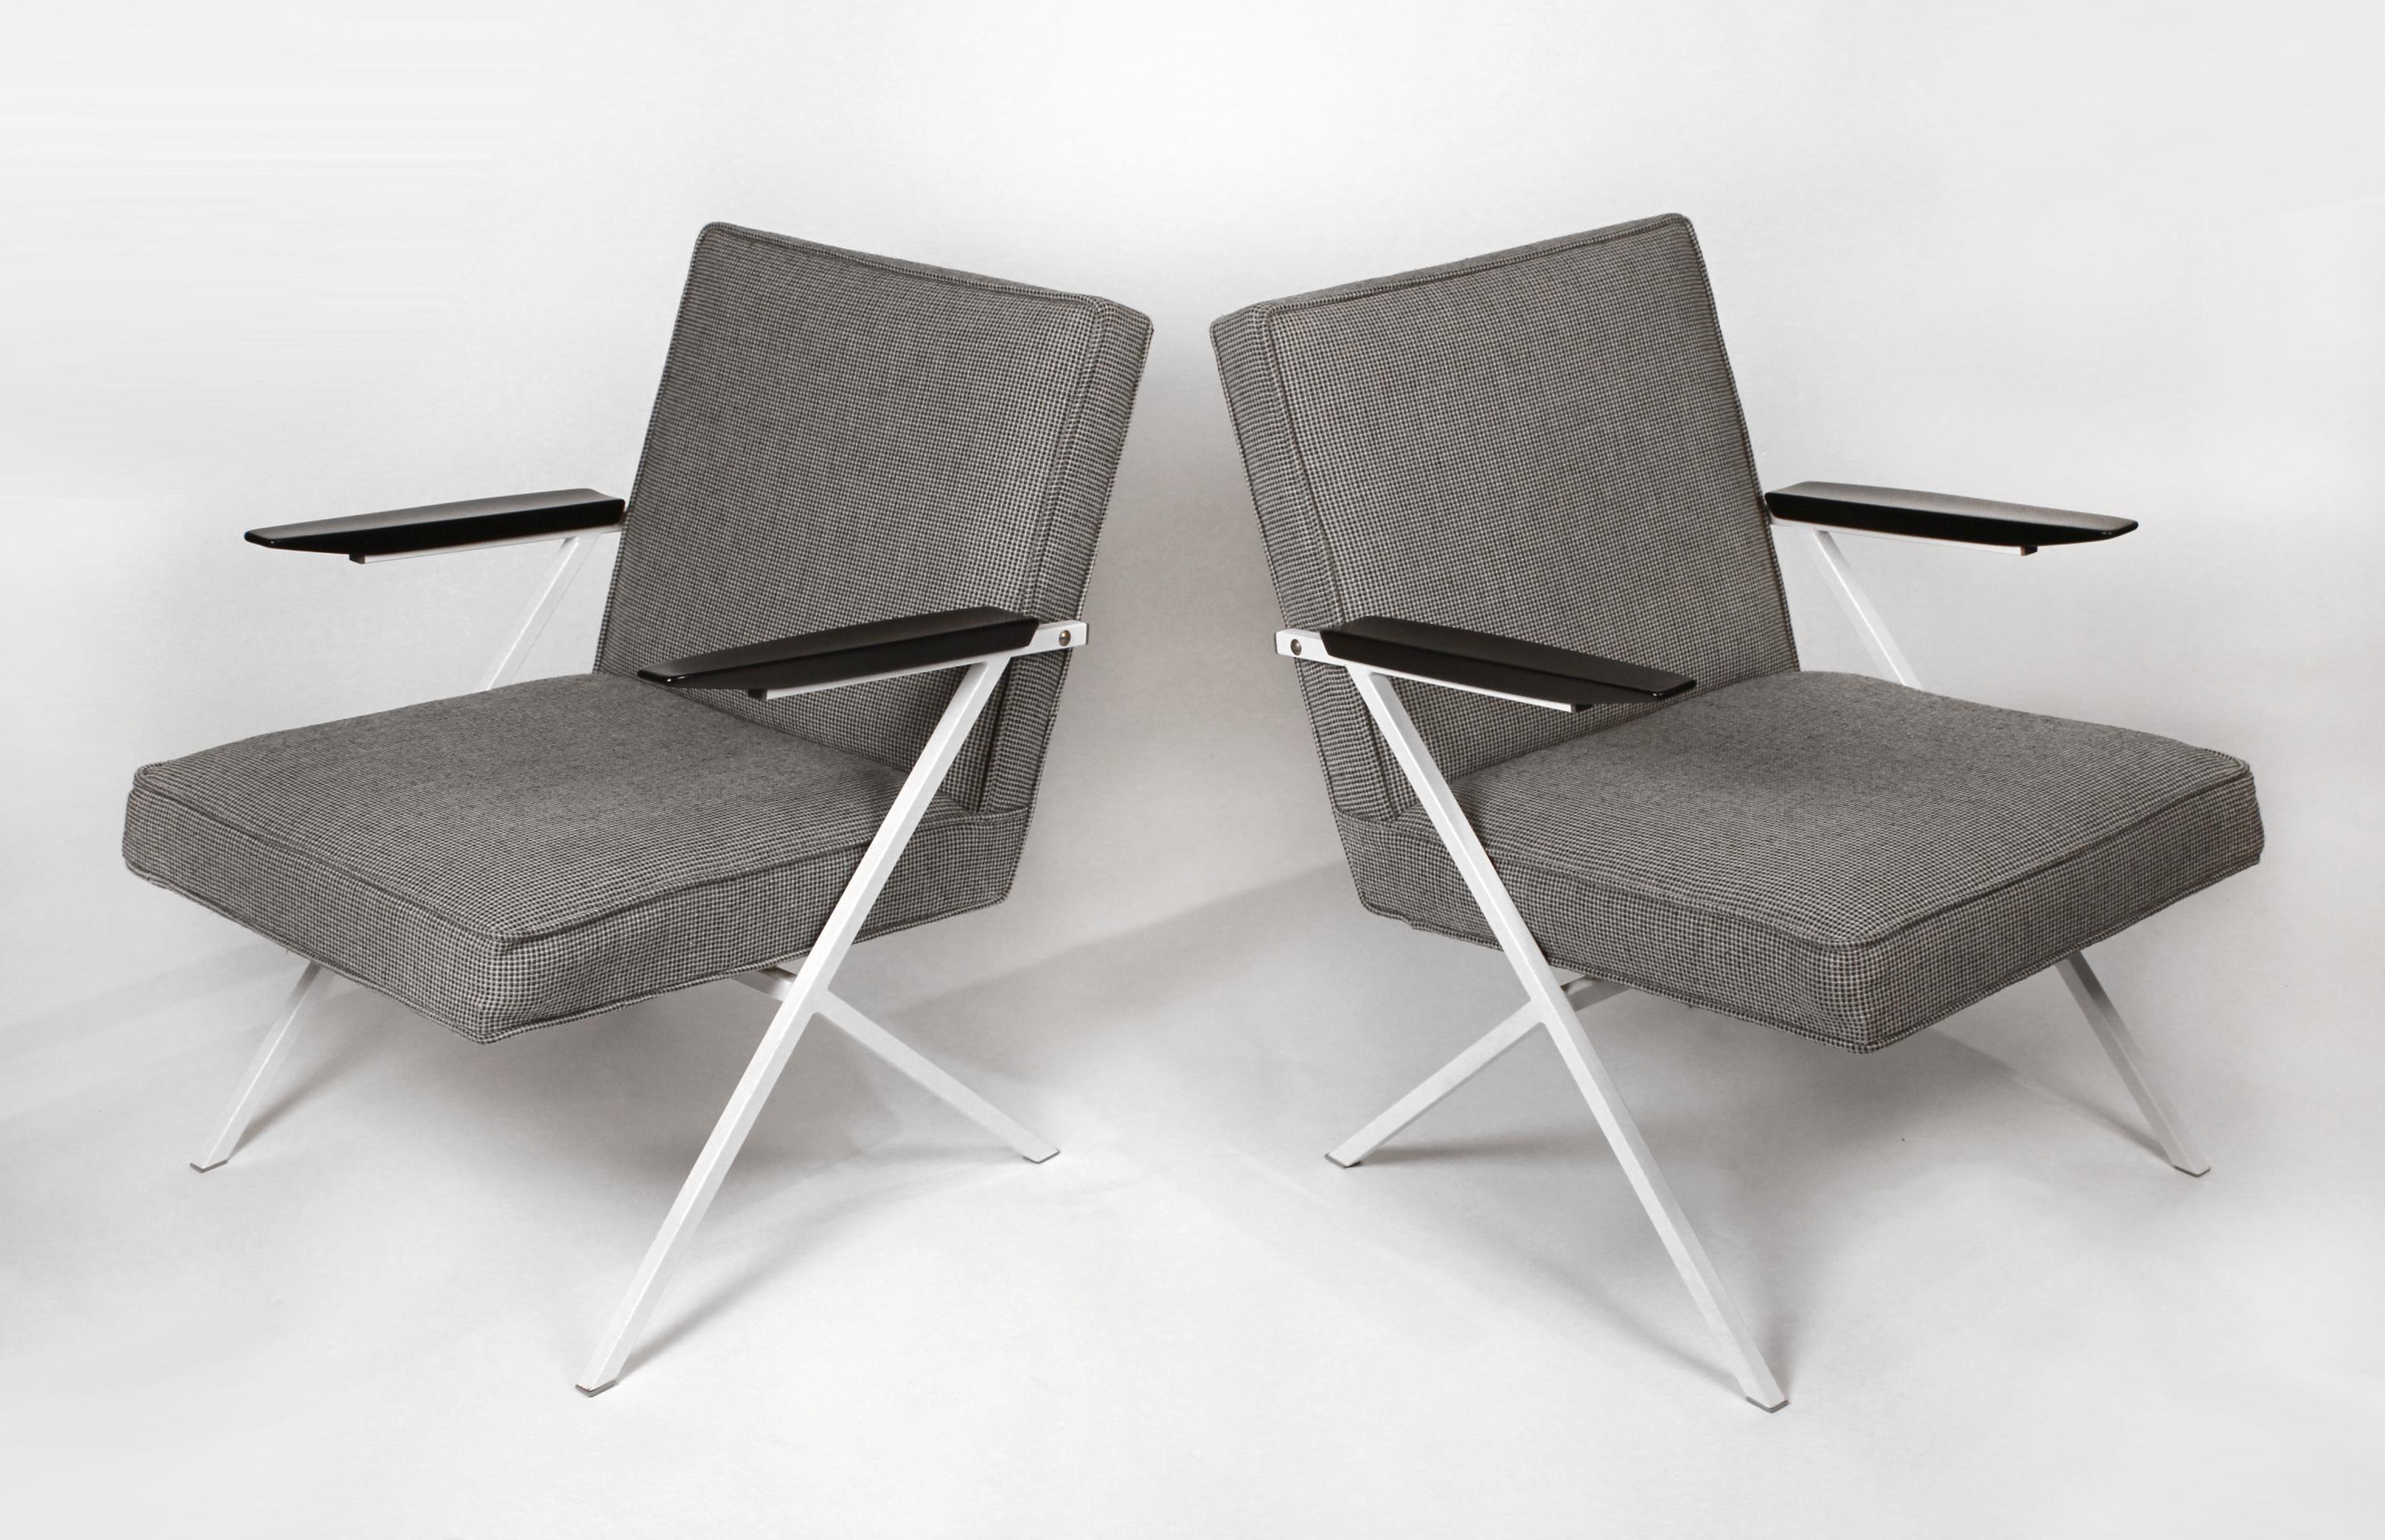 Rare pair of lounge chairs designed by Czechoslovakian Architect Ladislav Rado for Knoll and Drake in 1950. Model R-83.

The frames have been re-lacquered. The Knoll Tweed upholstery is all original.